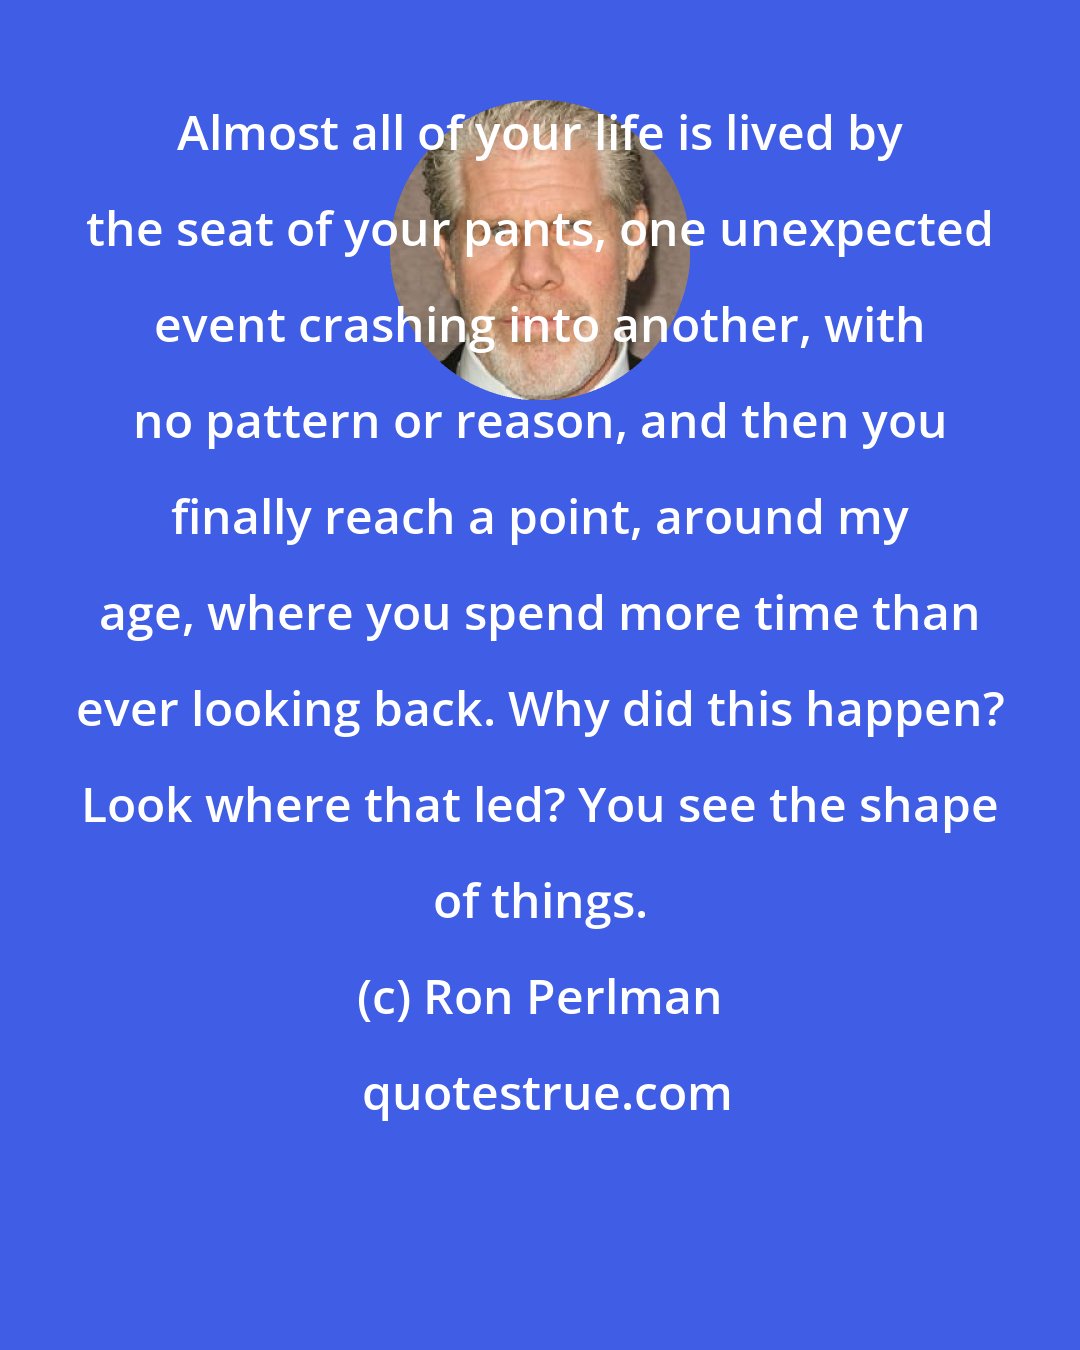 Ron Perlman: Almost all of your life is lived by the seat of your pants, one unexpected event crashing into another, with no pattern or reason, and then you finally reach a point, around my age, where you spend more time than ever looking back. Why did this happen? Look where that led? You see the shape of things.